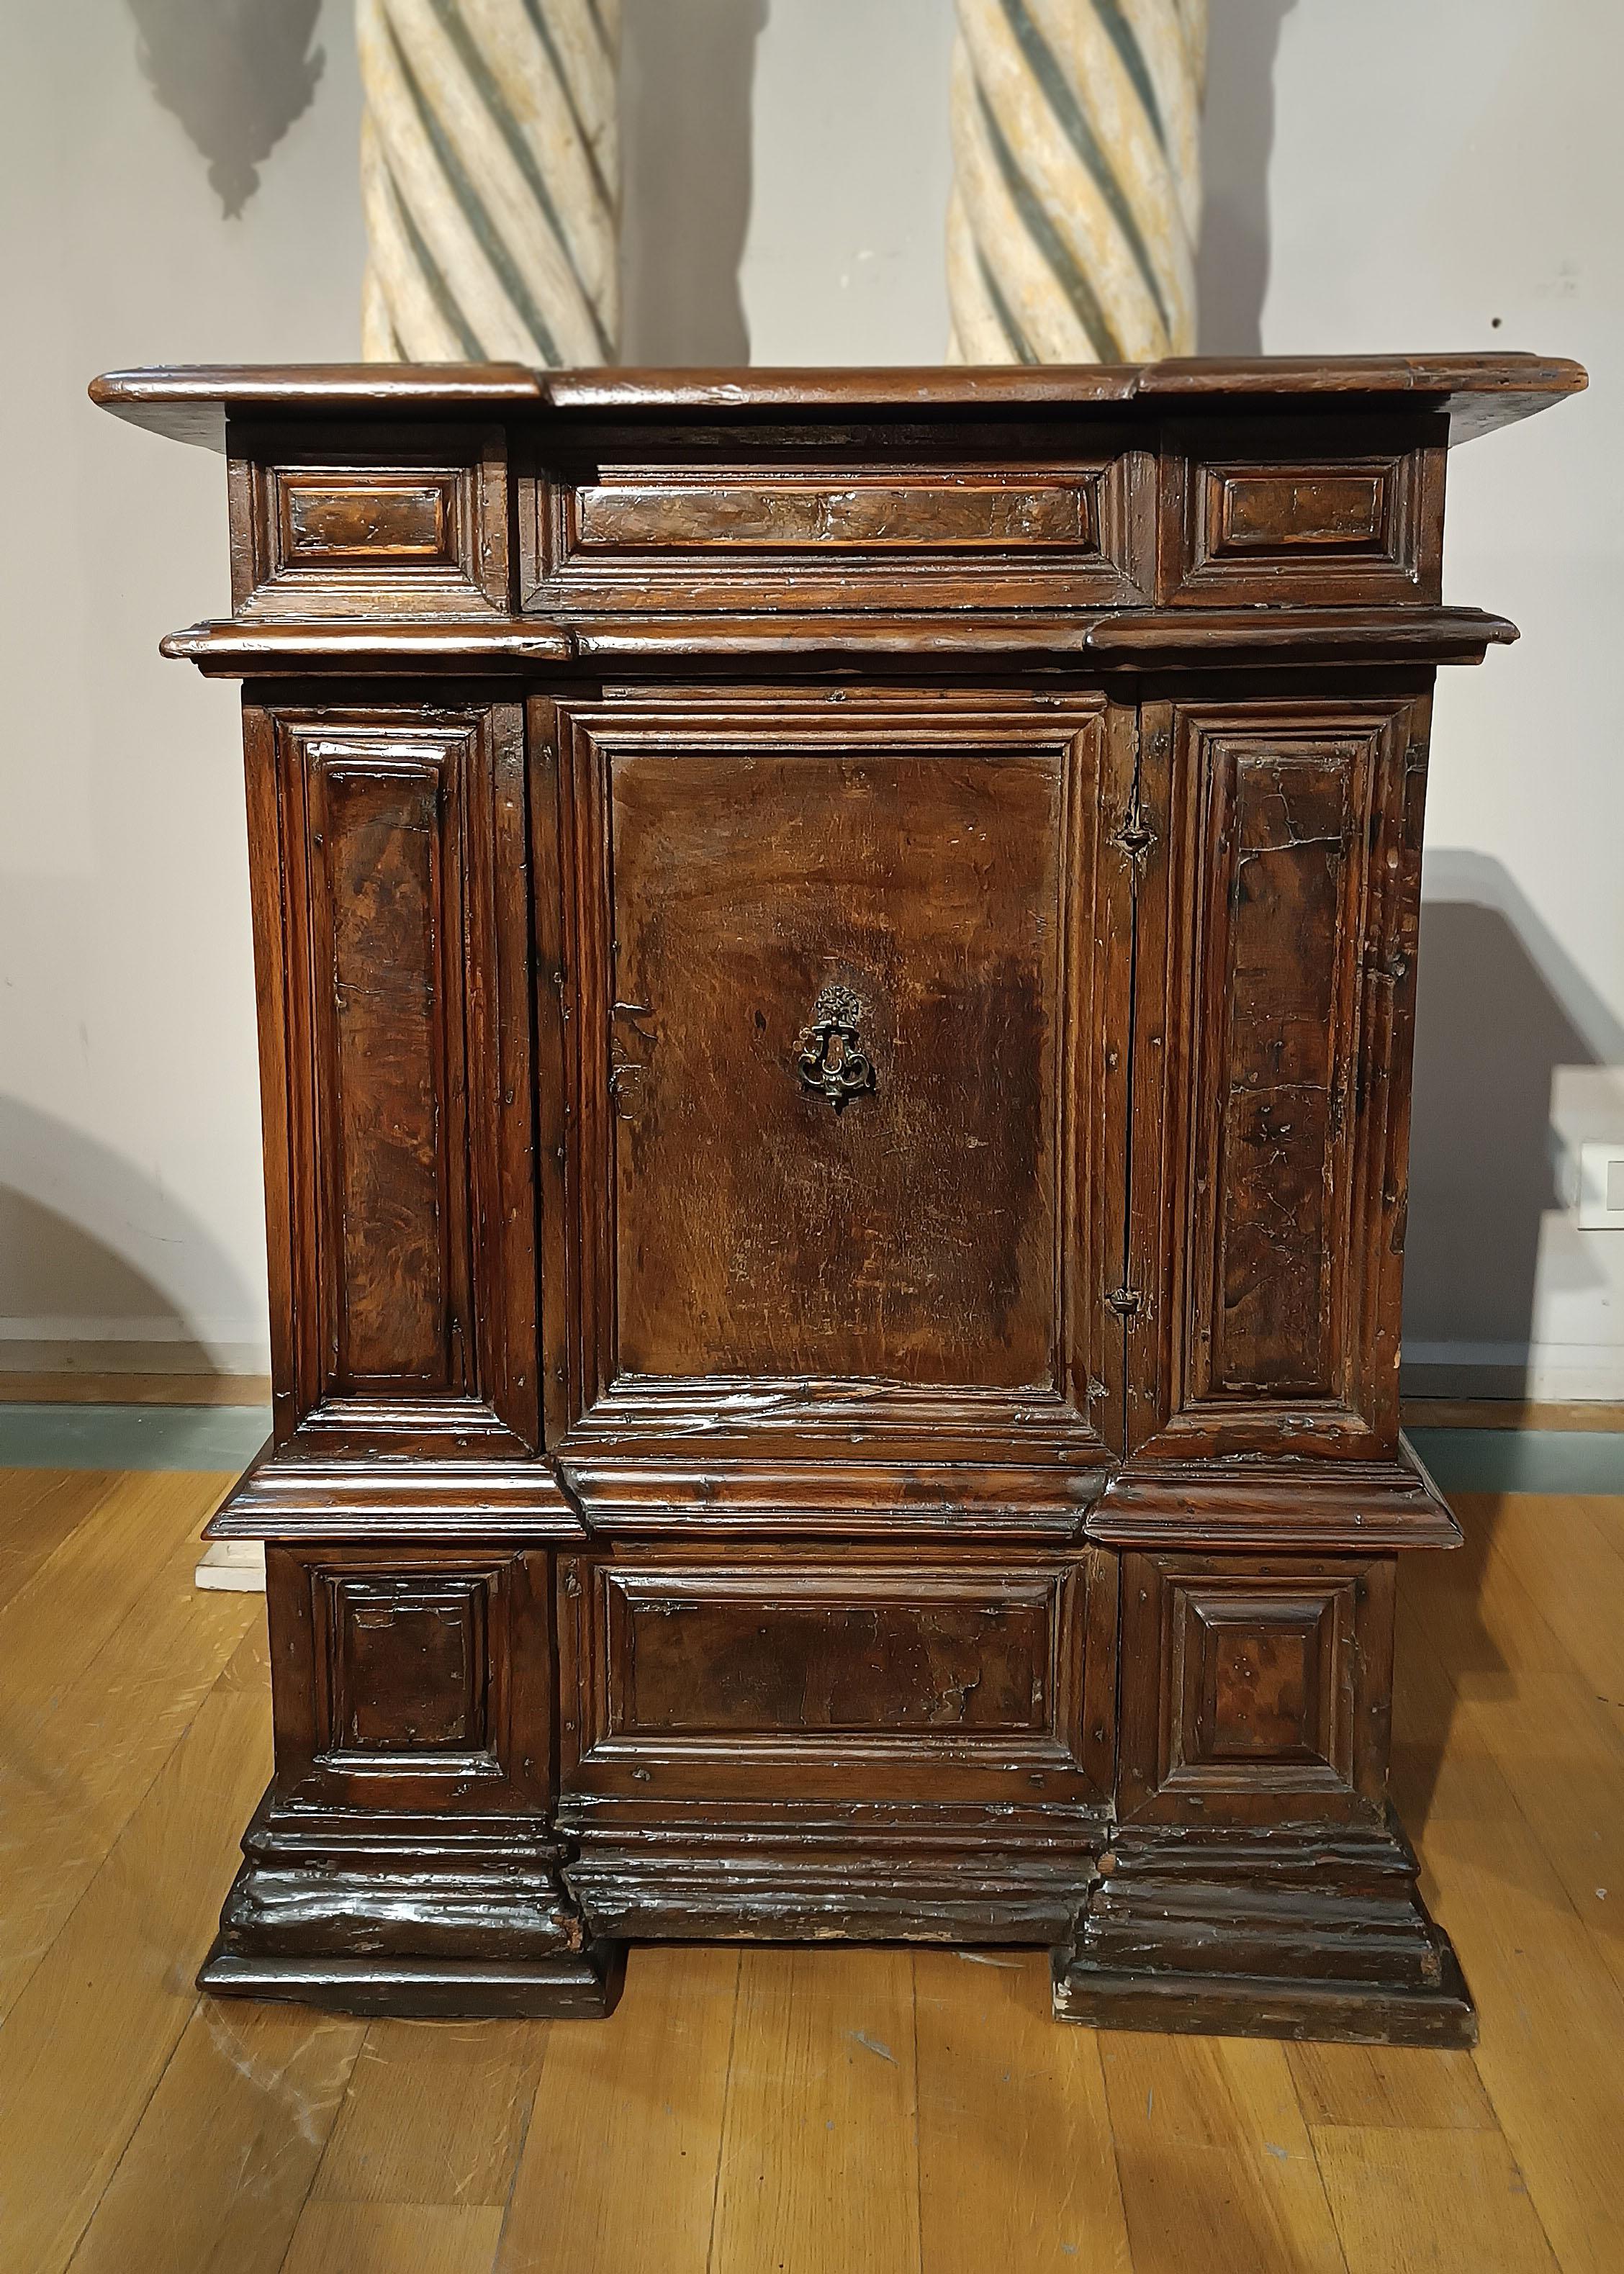 Beautiful and sophisticated candle holder small sideboard in solid walnut. The piece of furniture has a door with a small handle in lost wax cast bronze, while the folding top was used to store candles. The feet and decorations are characterized by